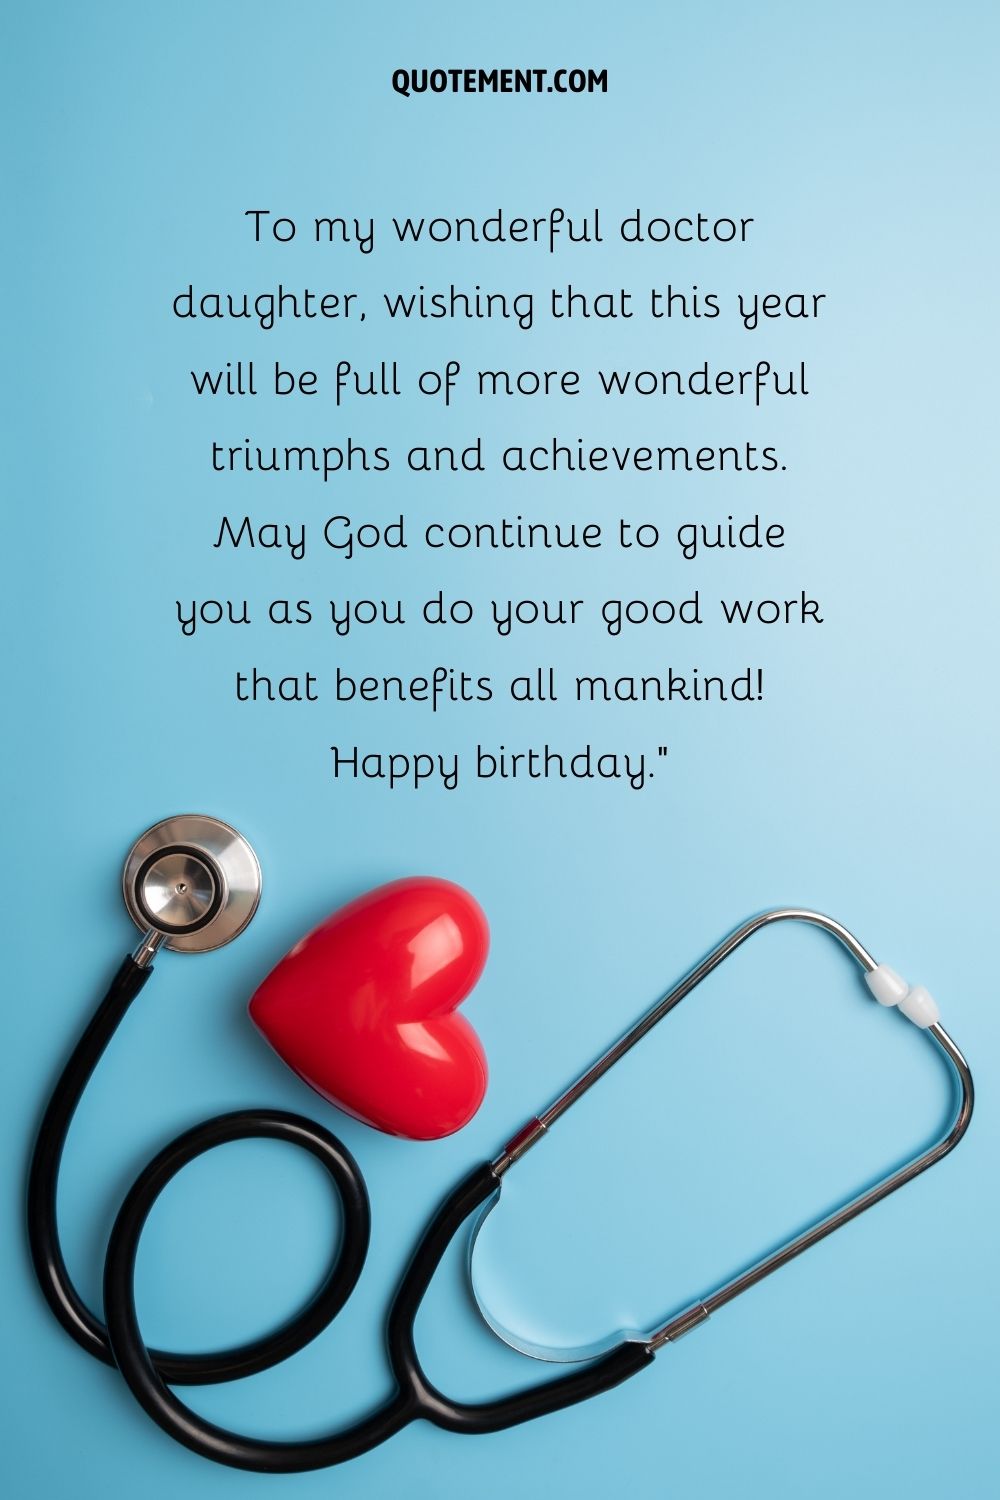 blessed daughter happy birthday representing birthday wishes doctor daughter